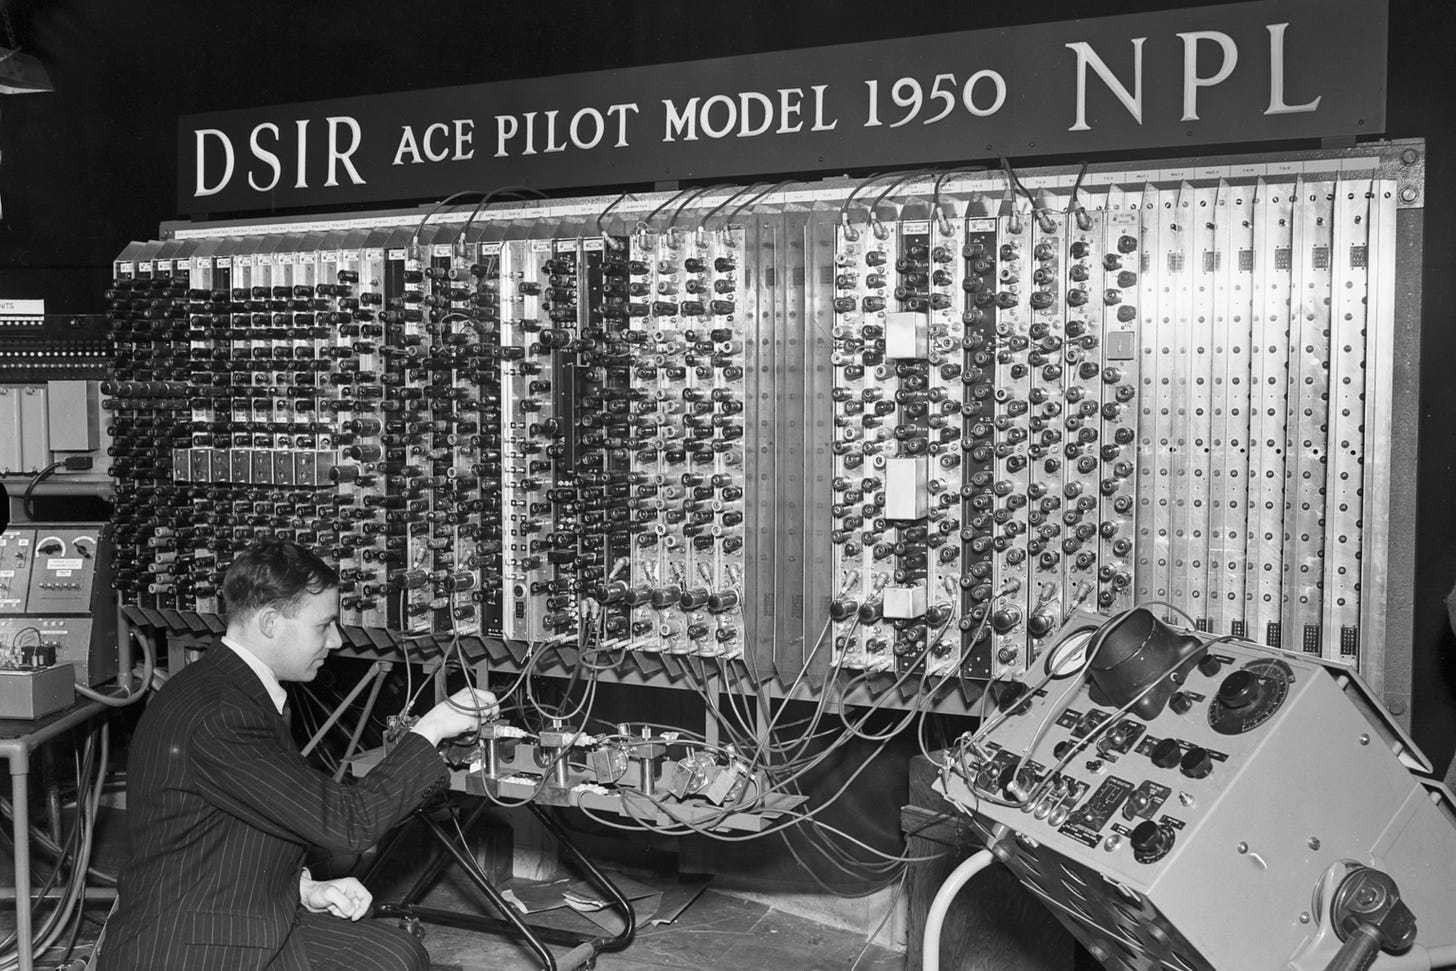 AI may pass the famed Turing Test. Who is Alan Turing?